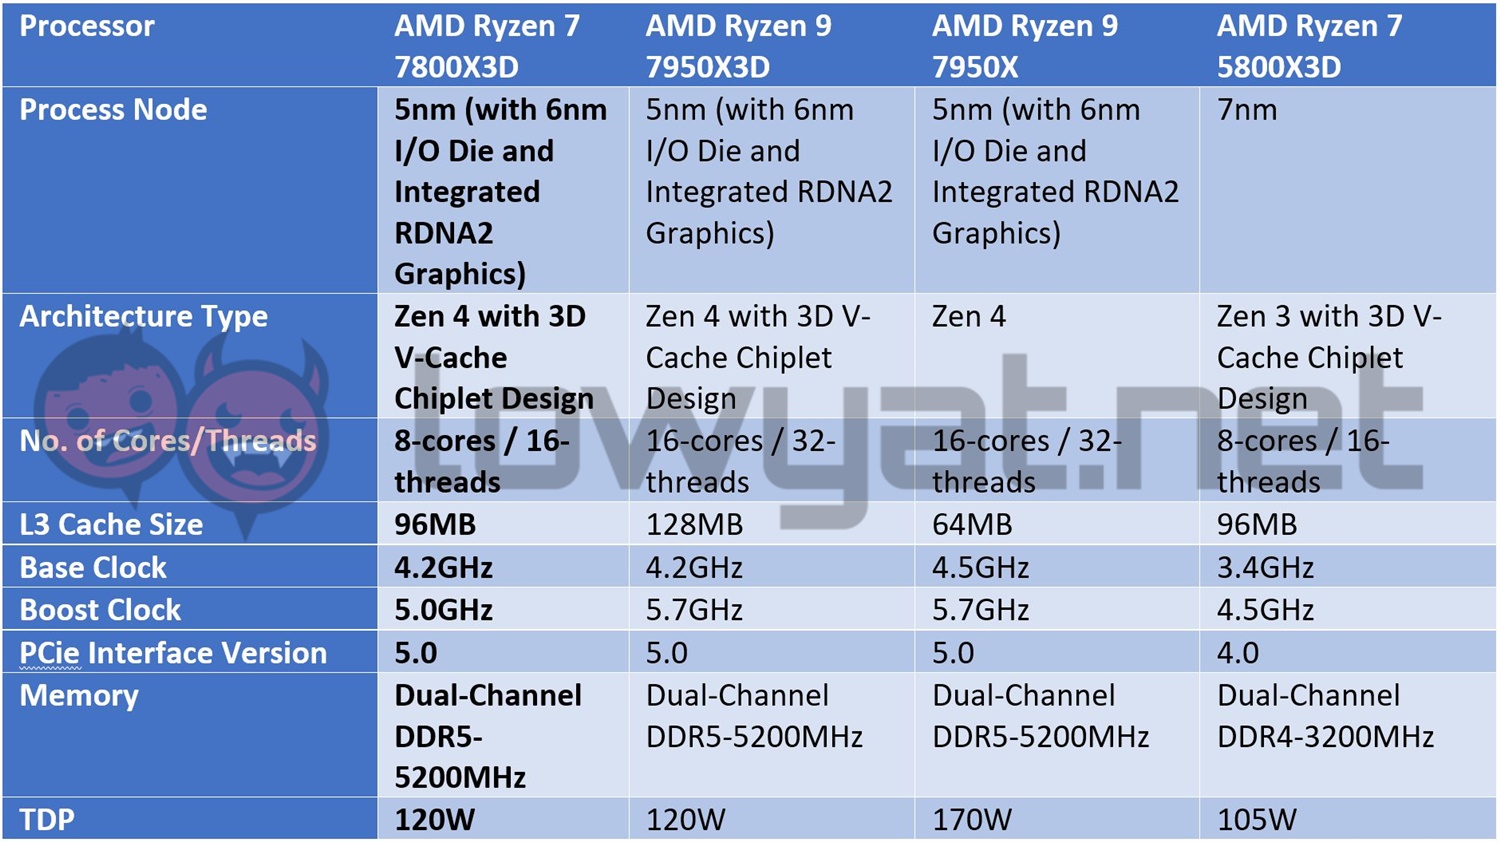 AMD R7 7800X3D Reviews are out